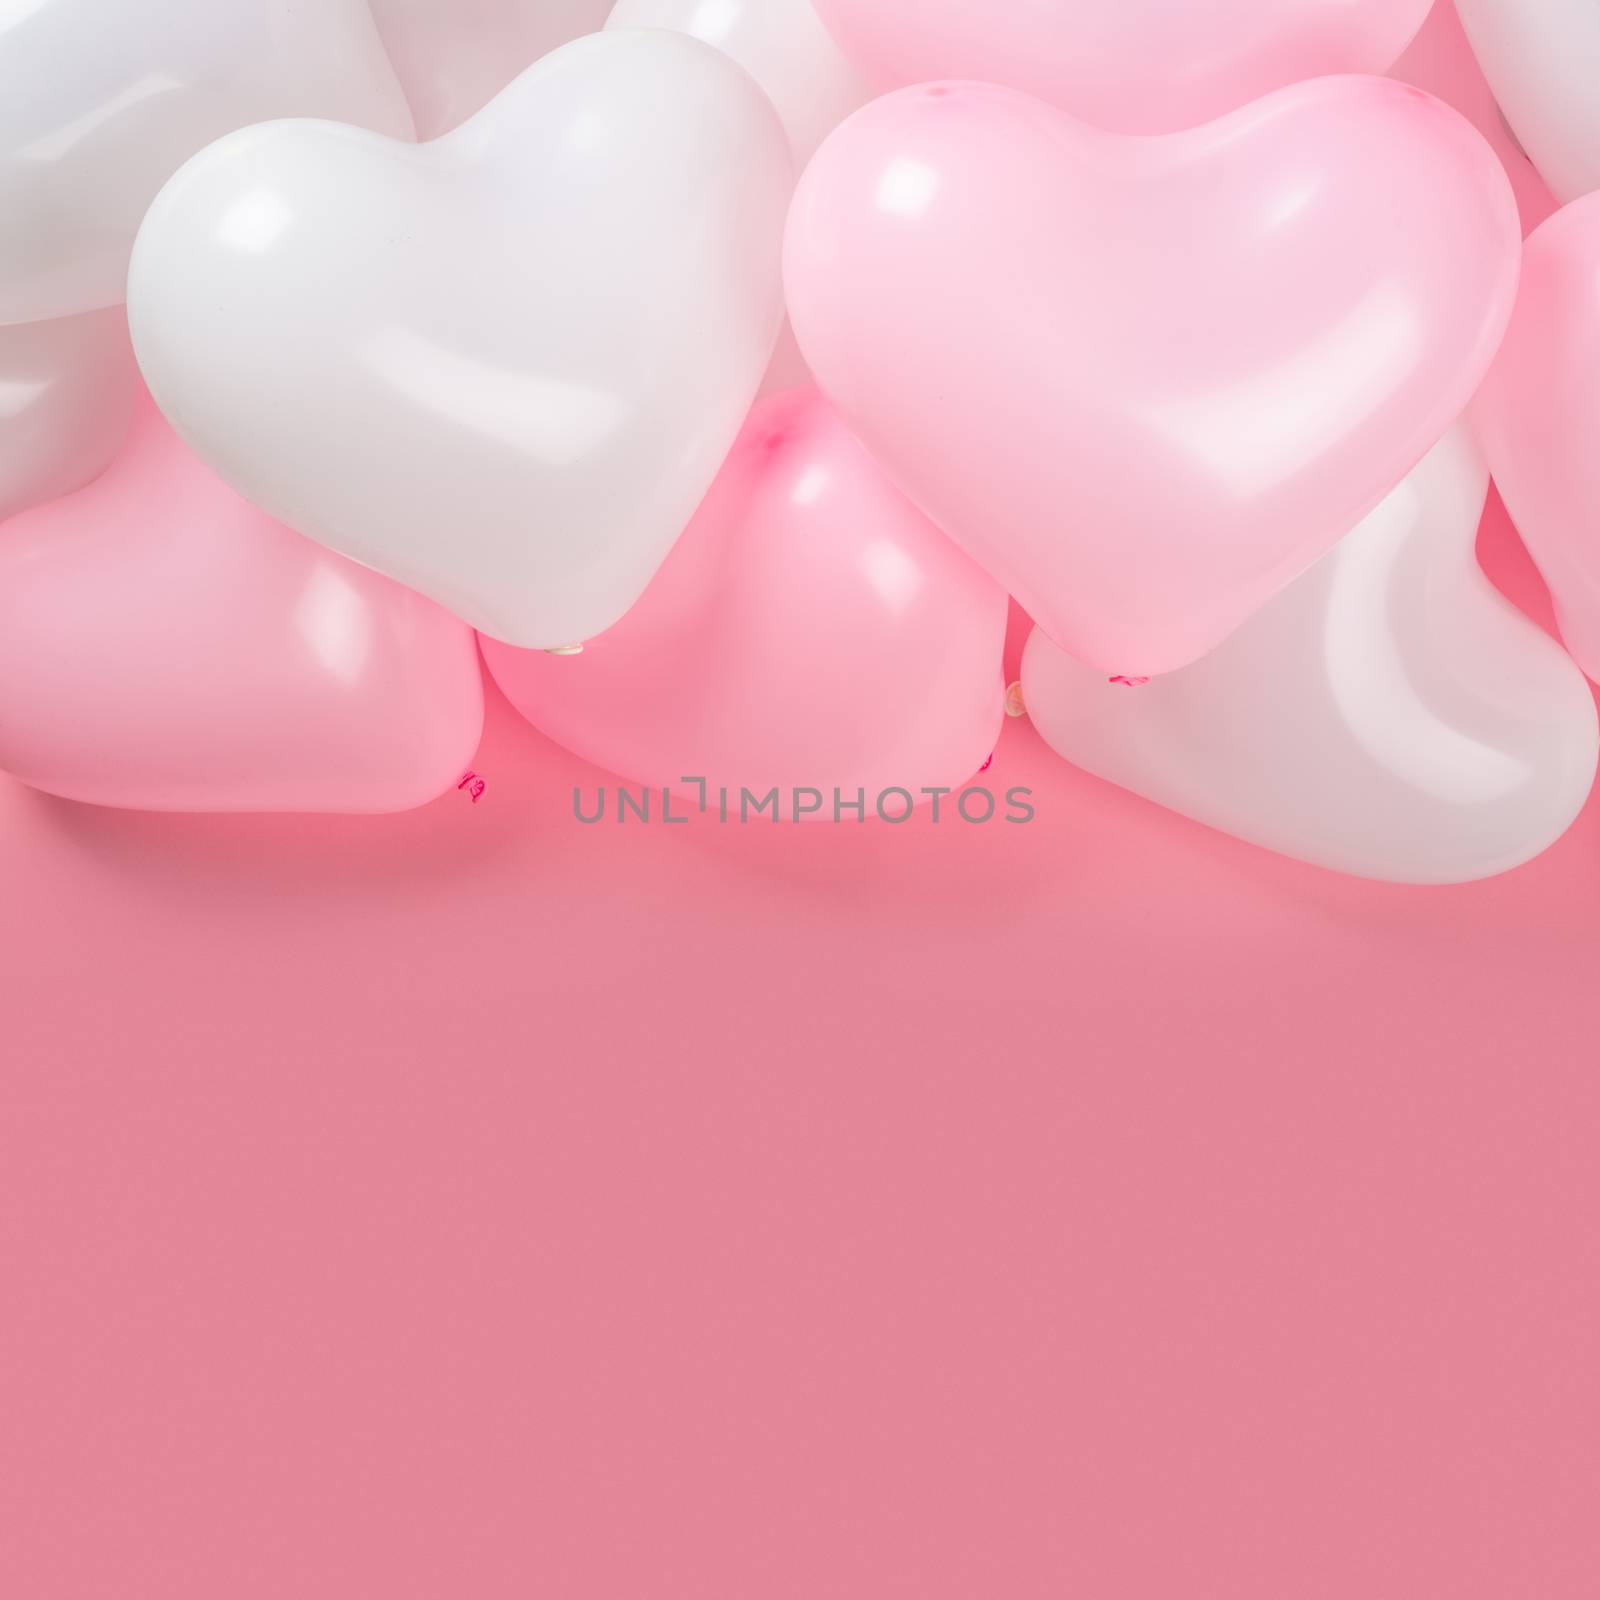 Happy valentines day greetings many heart shaped pink and white balloons background border frame flat lay with copy space for text